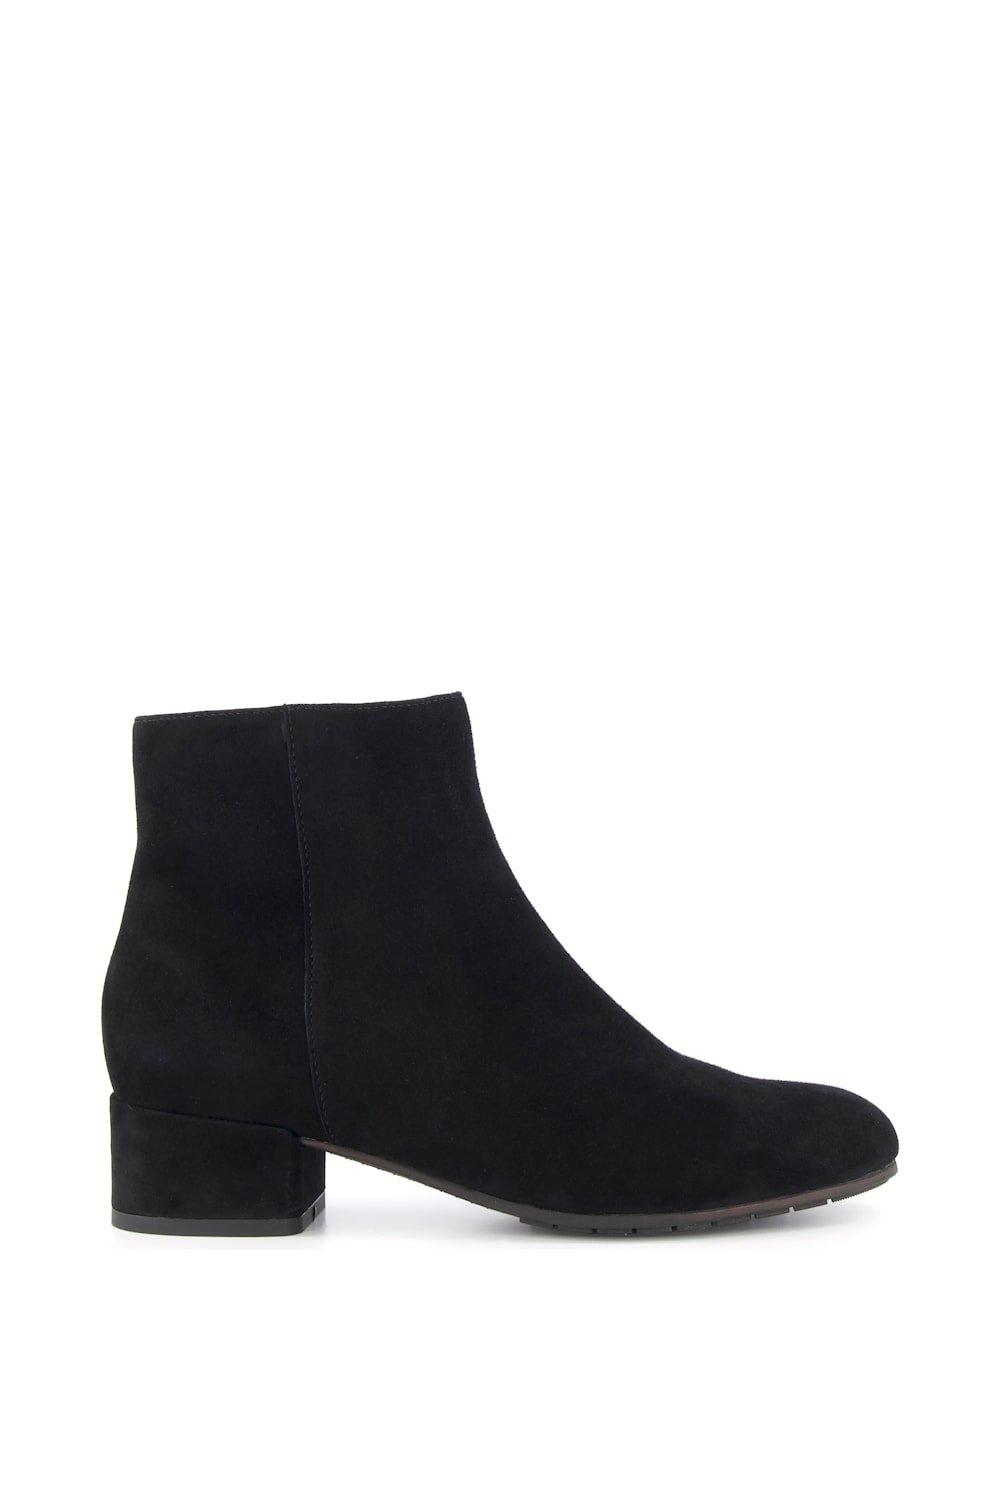 Boots | Wide Fit 'Pippie' Suede Ankle Boots | Dune London